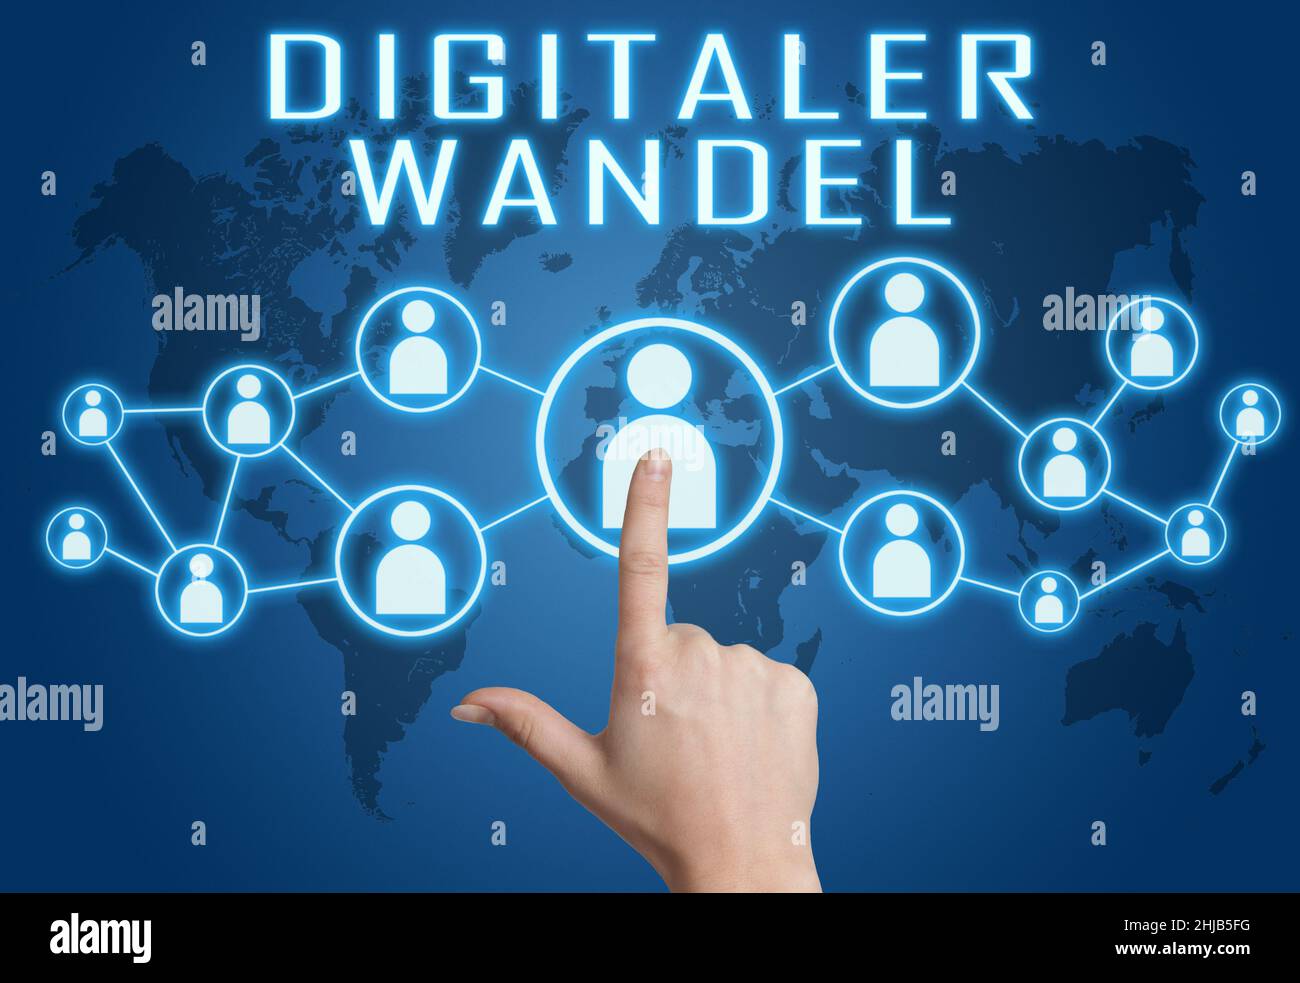 Digitaler Wandel - german word for digital change or digital business transformation - text concept with hand pressing social icons on blue world map Stock Photo